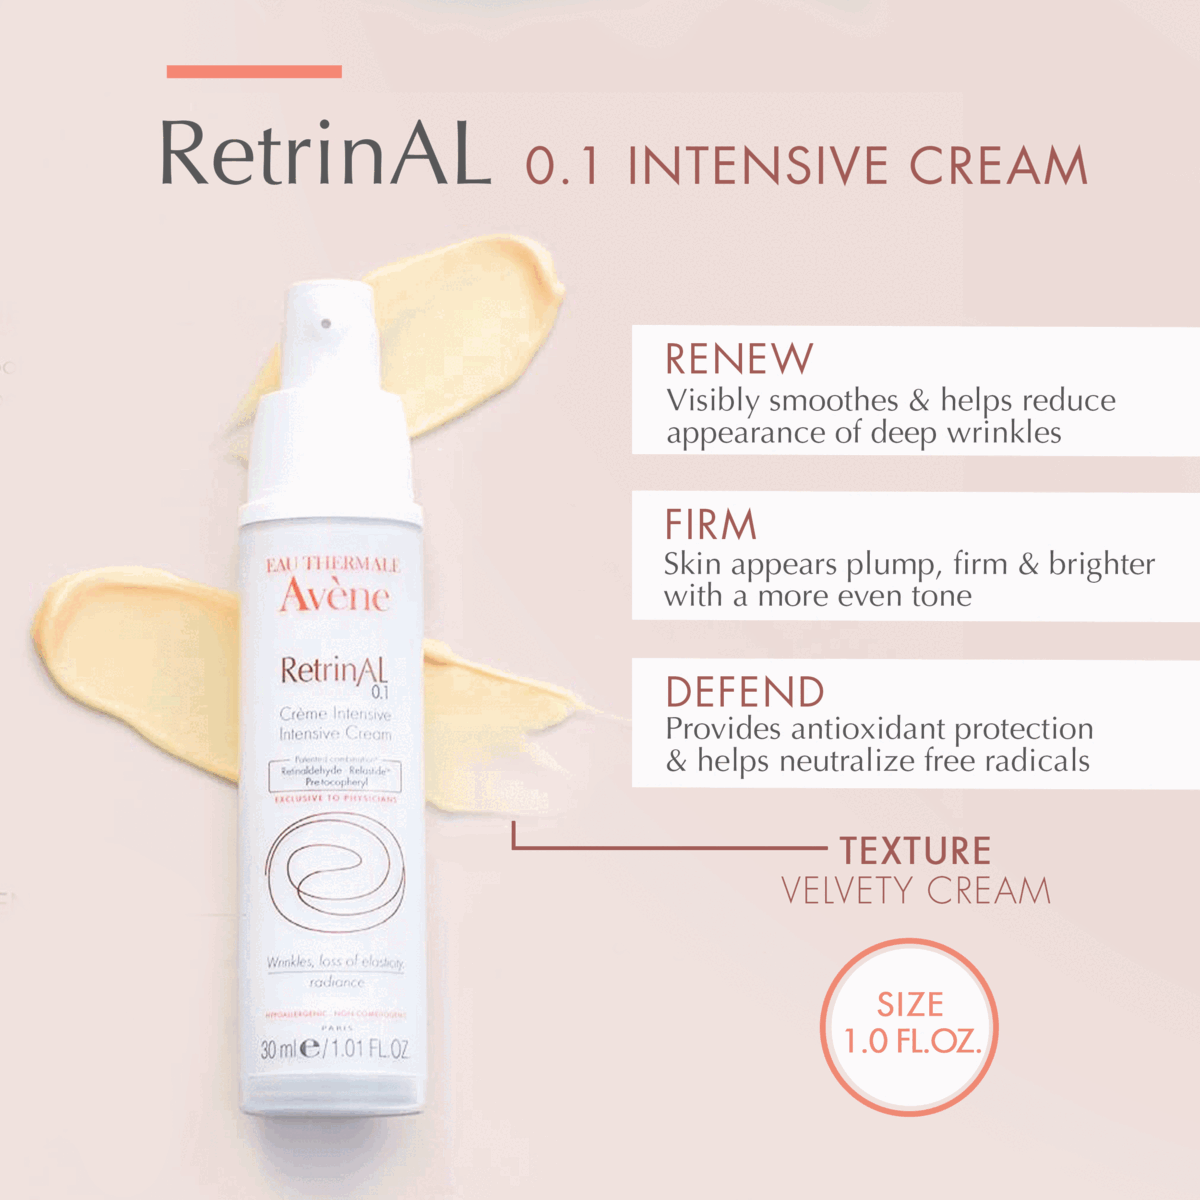 Image 1, product benefits. Image 2, perfect for all skin types. Image 3, ingredients and their benefits. Image 4, directions. Image 5, clinically shown